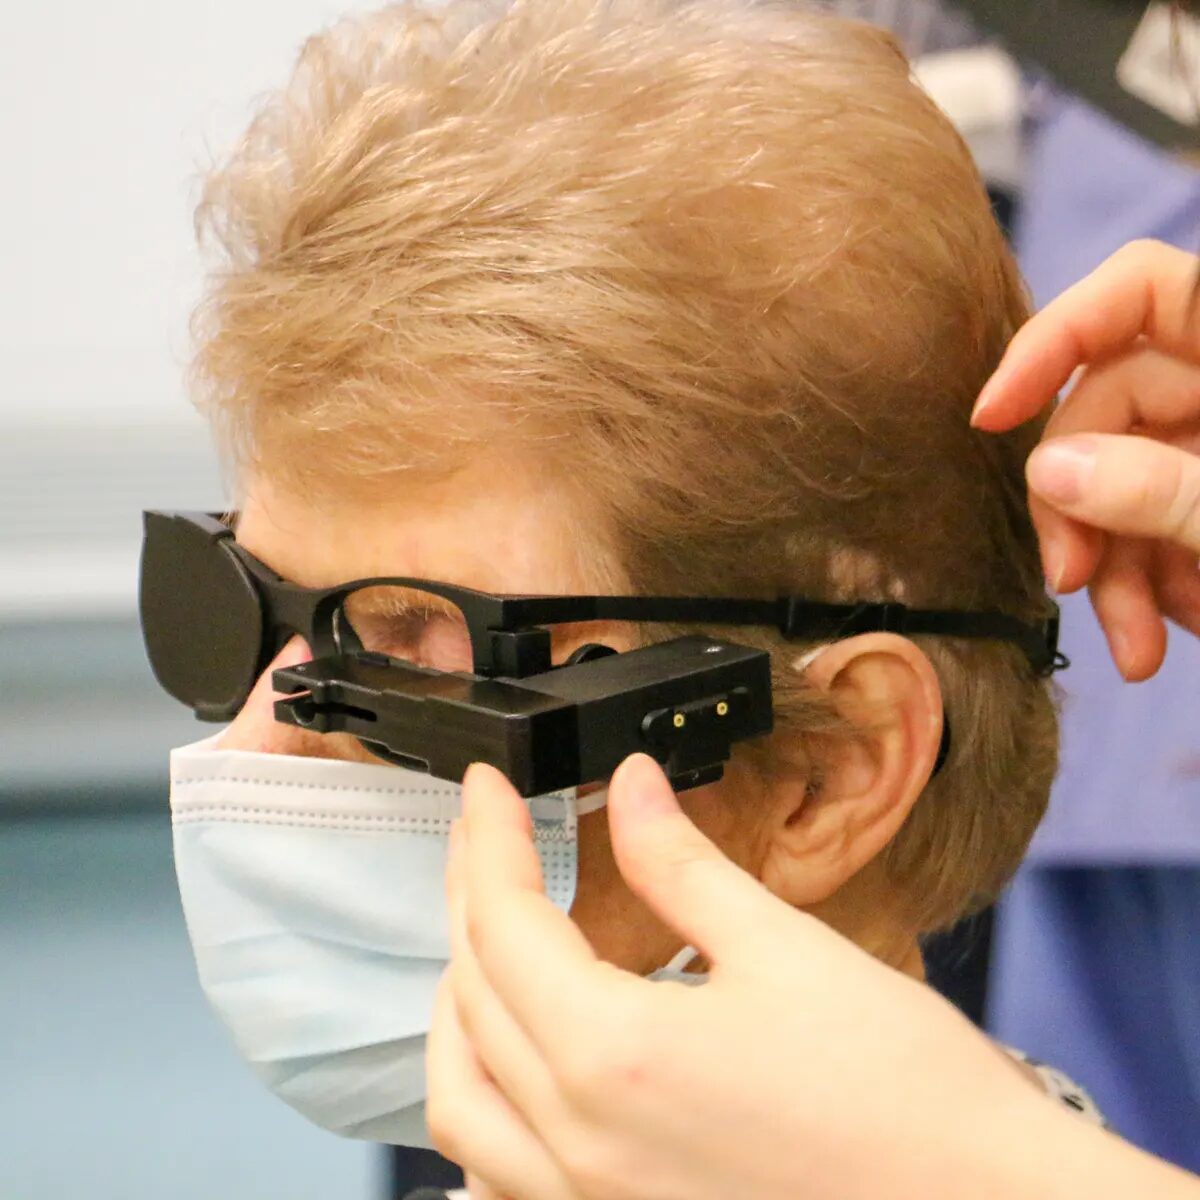 Tech that Offers Hope for Cure of Blindness without Surgery